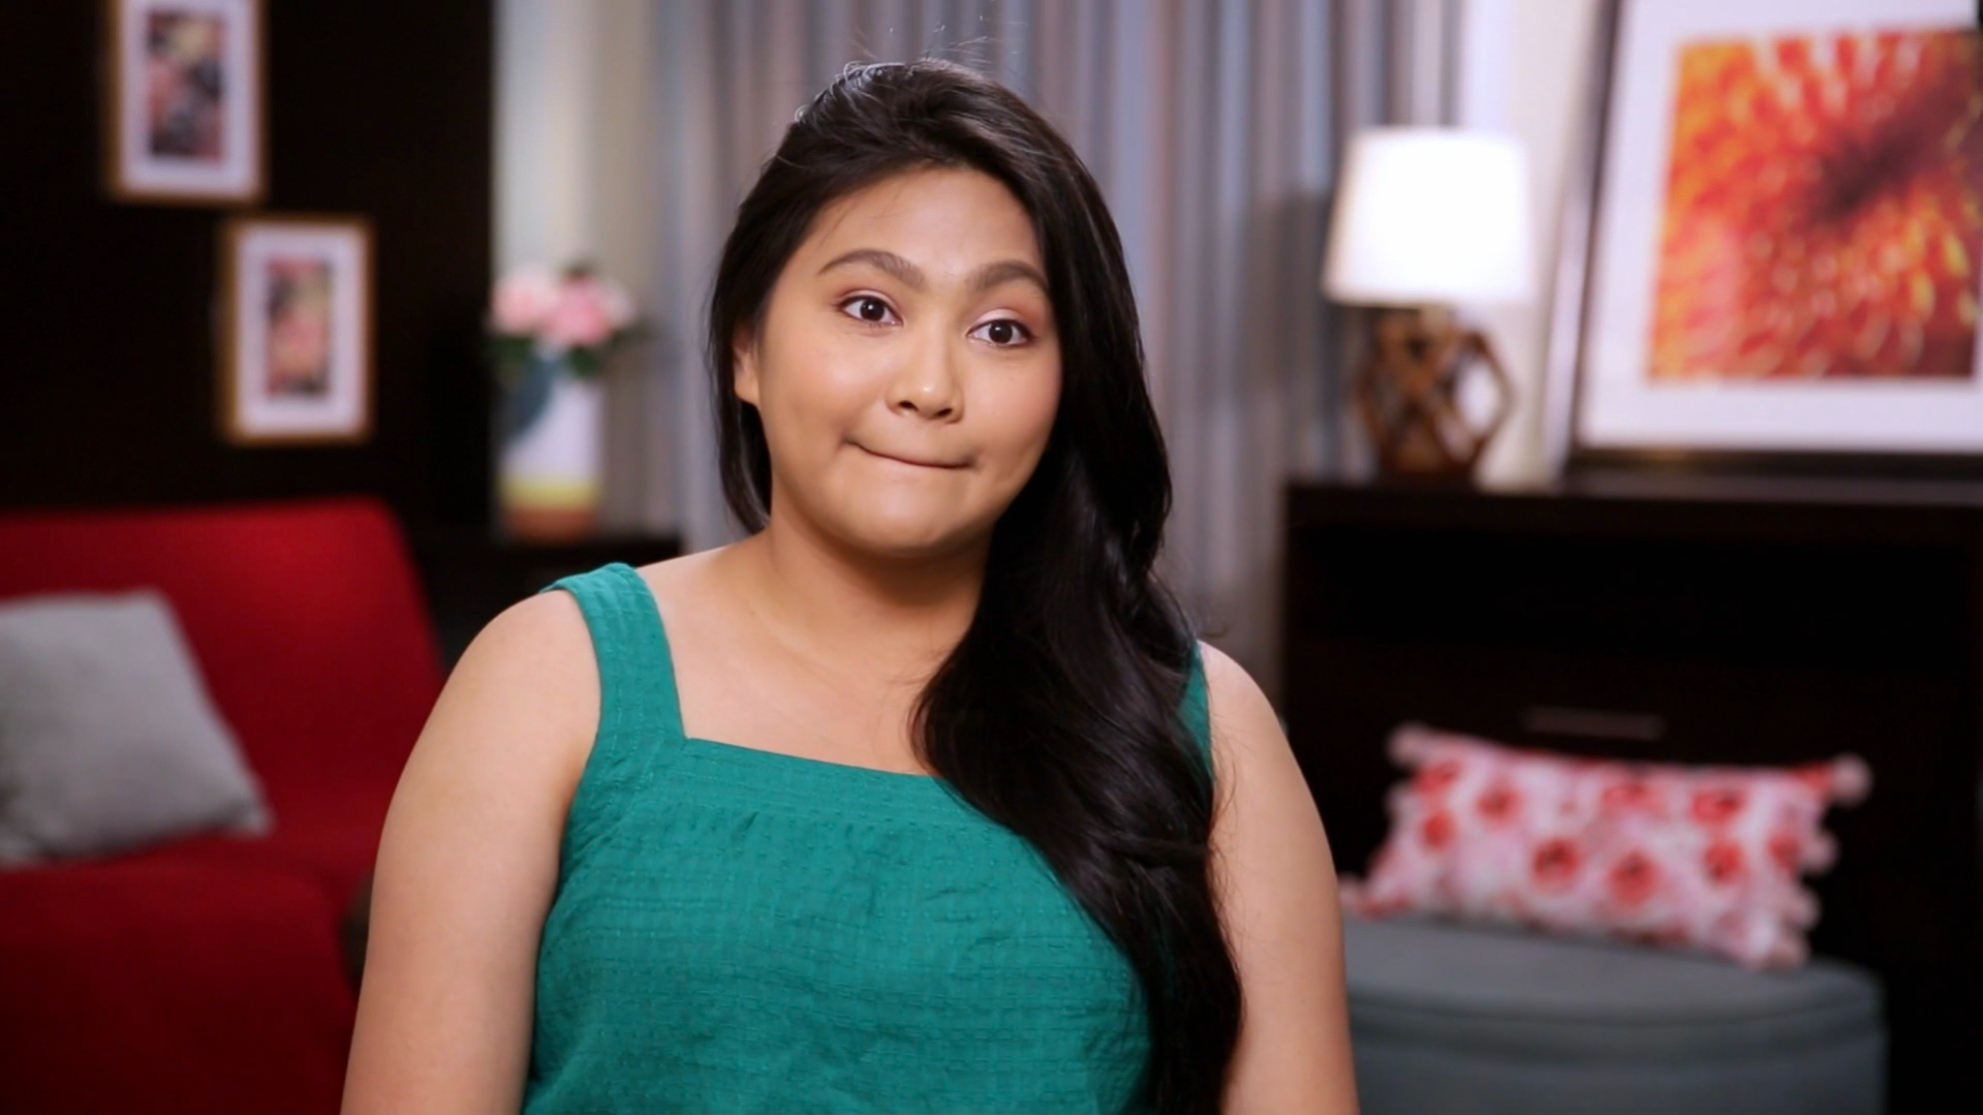 90 Day Fiance’s Leida Margaretha Charged With 3 Felonies